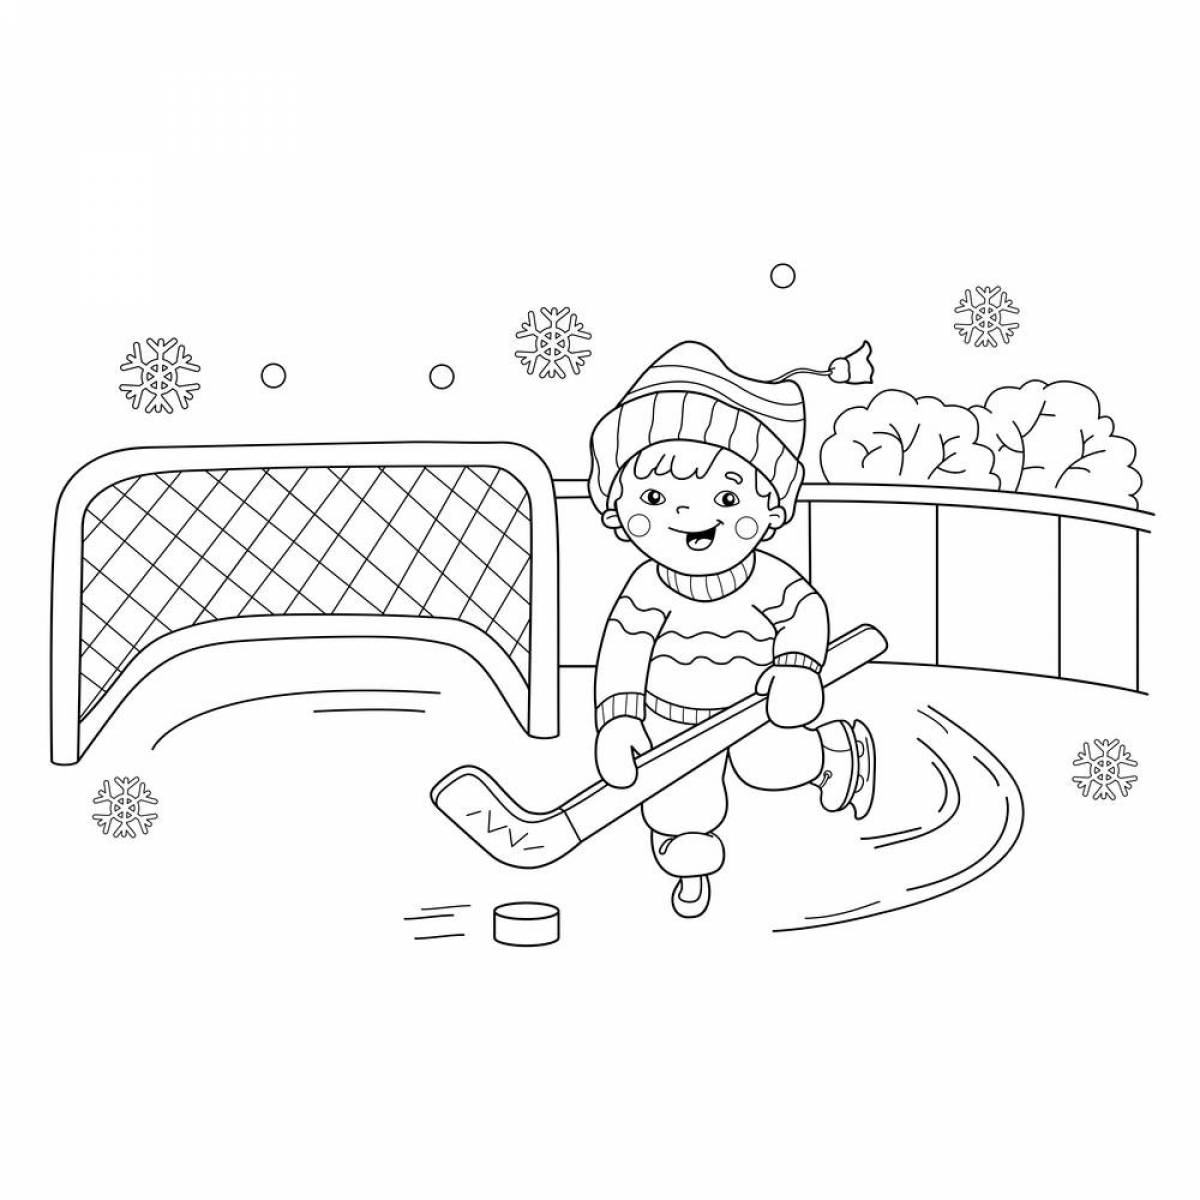 Sparkling winter sports coloring book for 5-6 year olds